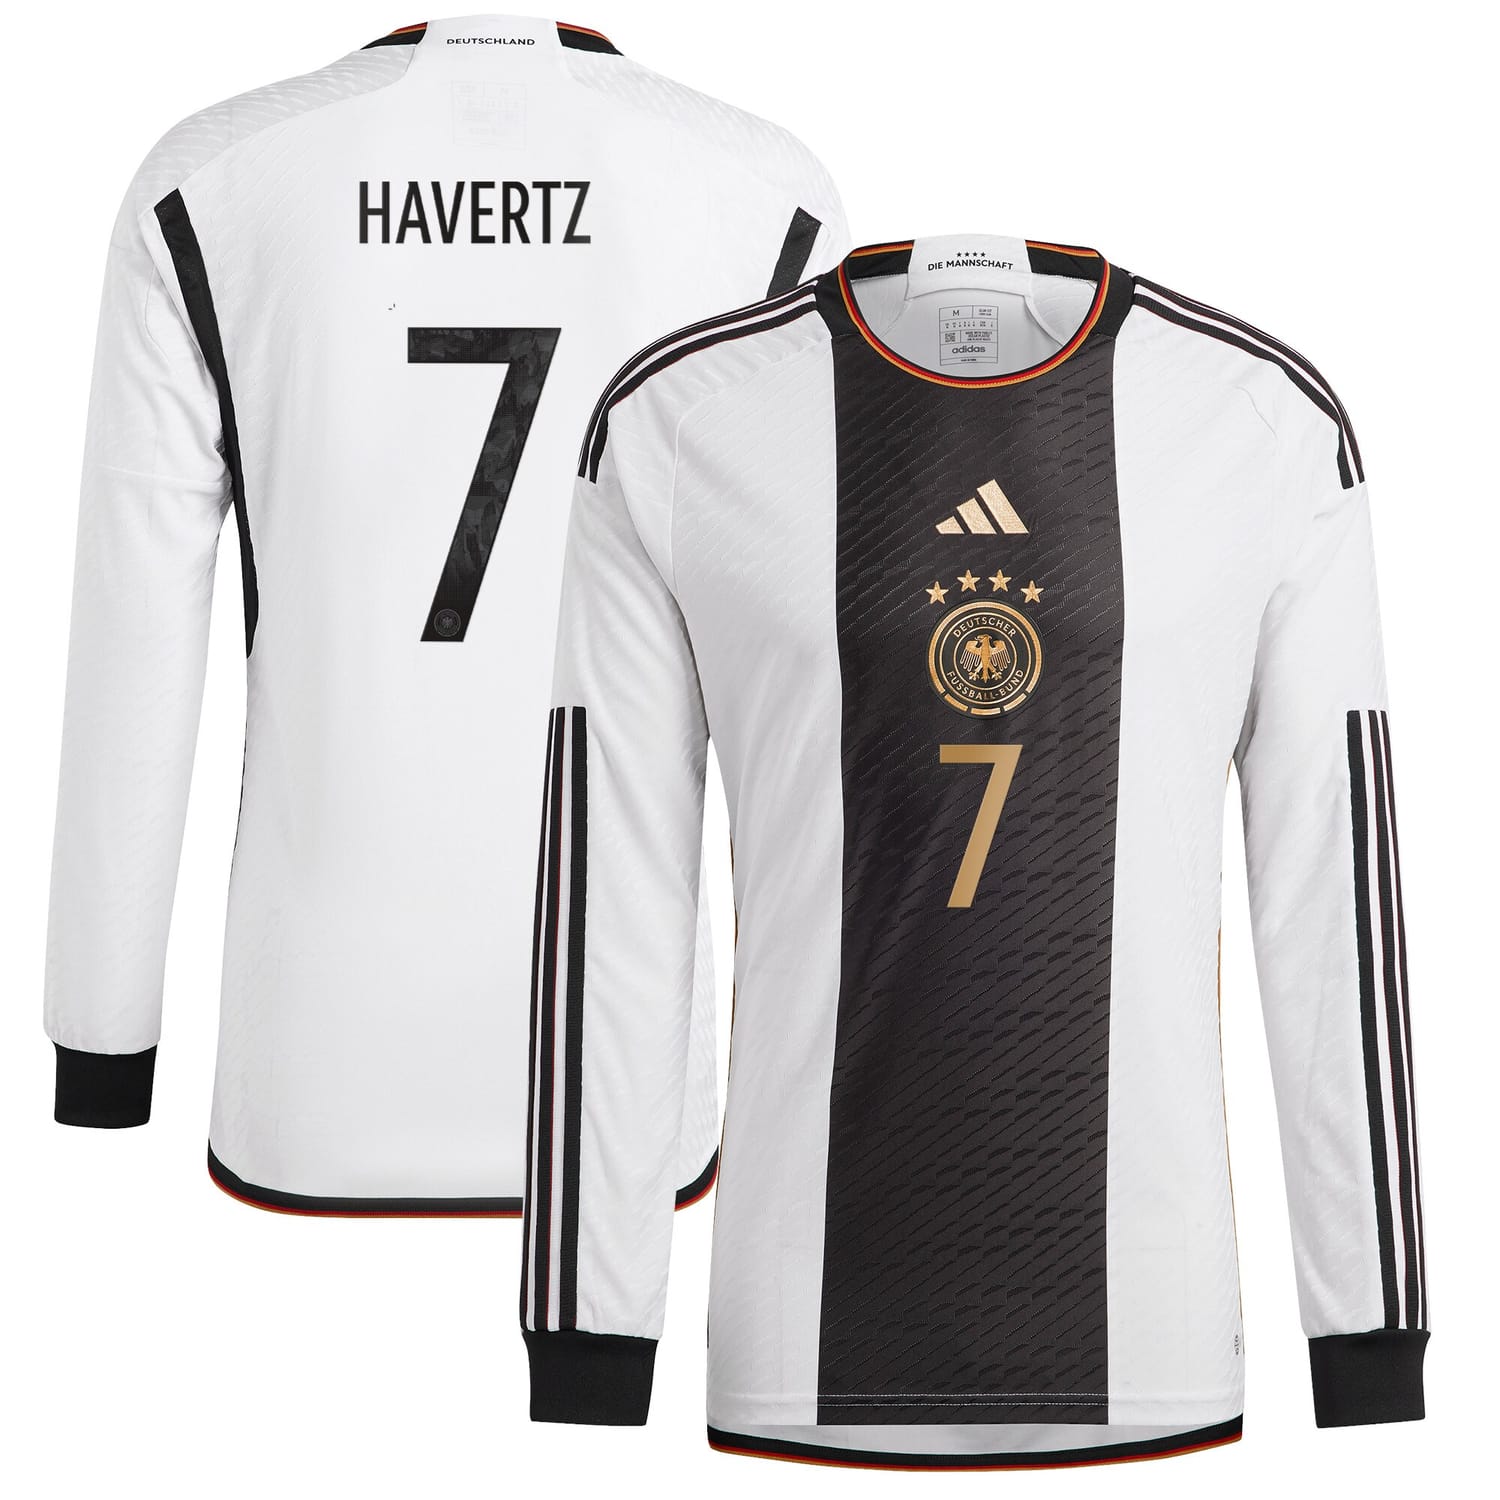 Germany National Team Home Authentic Jersey Shirt Long Sleeve player Kai Havertz 7 printing for Men